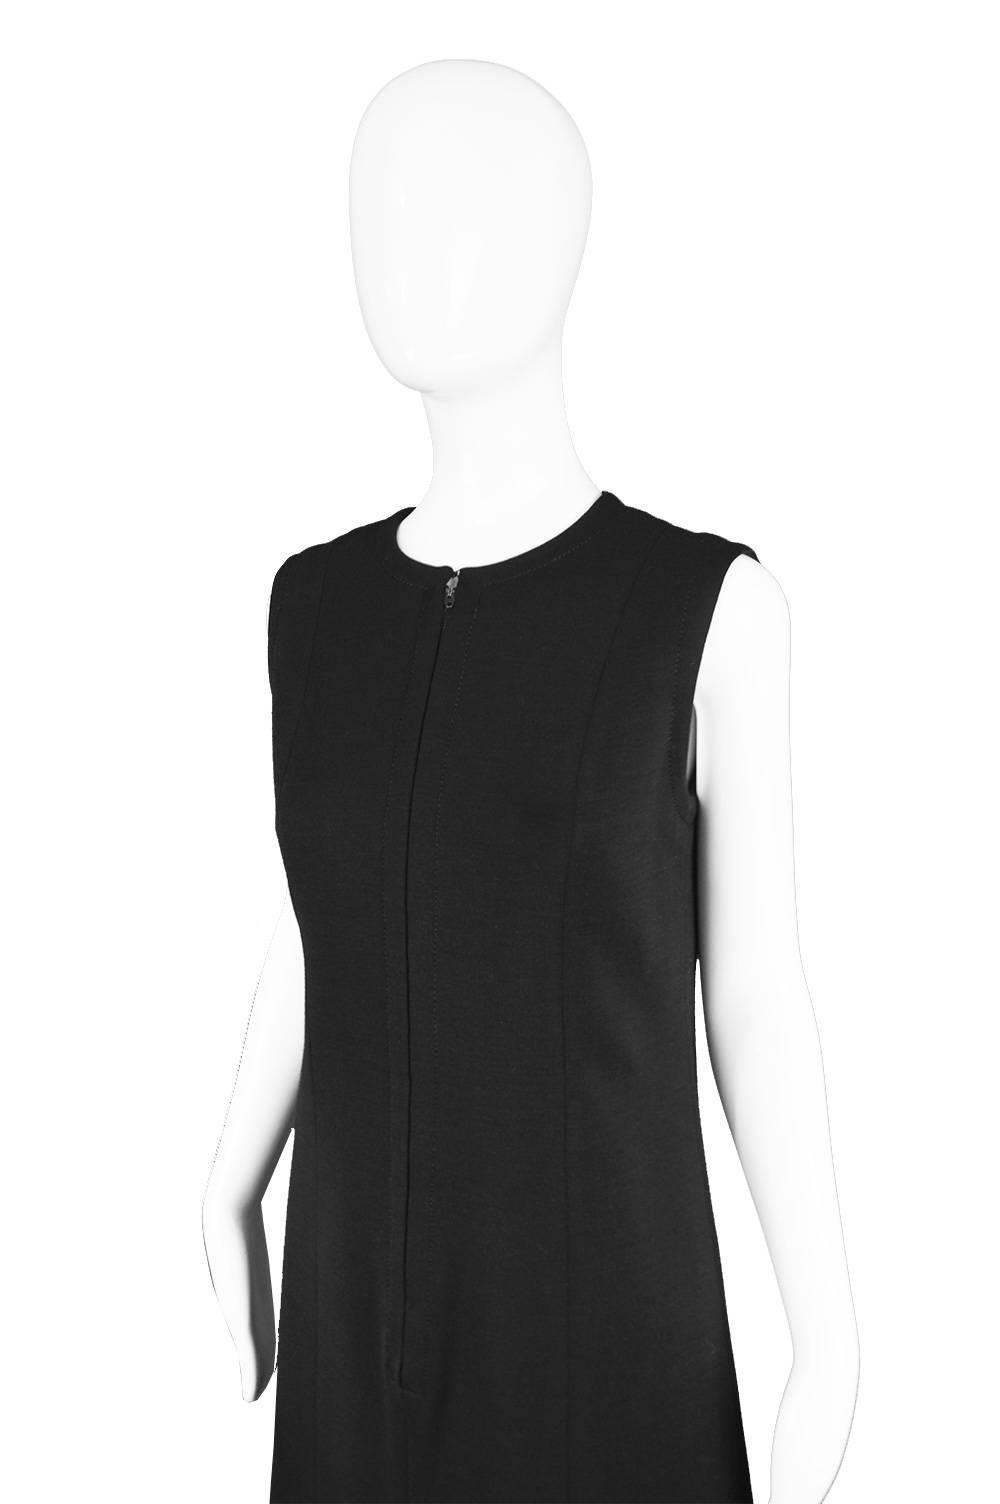 Jean Patou Vintage 1960s Black Wool Sleeveless Mod Minimalist Shift Dress  In Excellent Condition For Sale In Doncaster, South Yorkshire